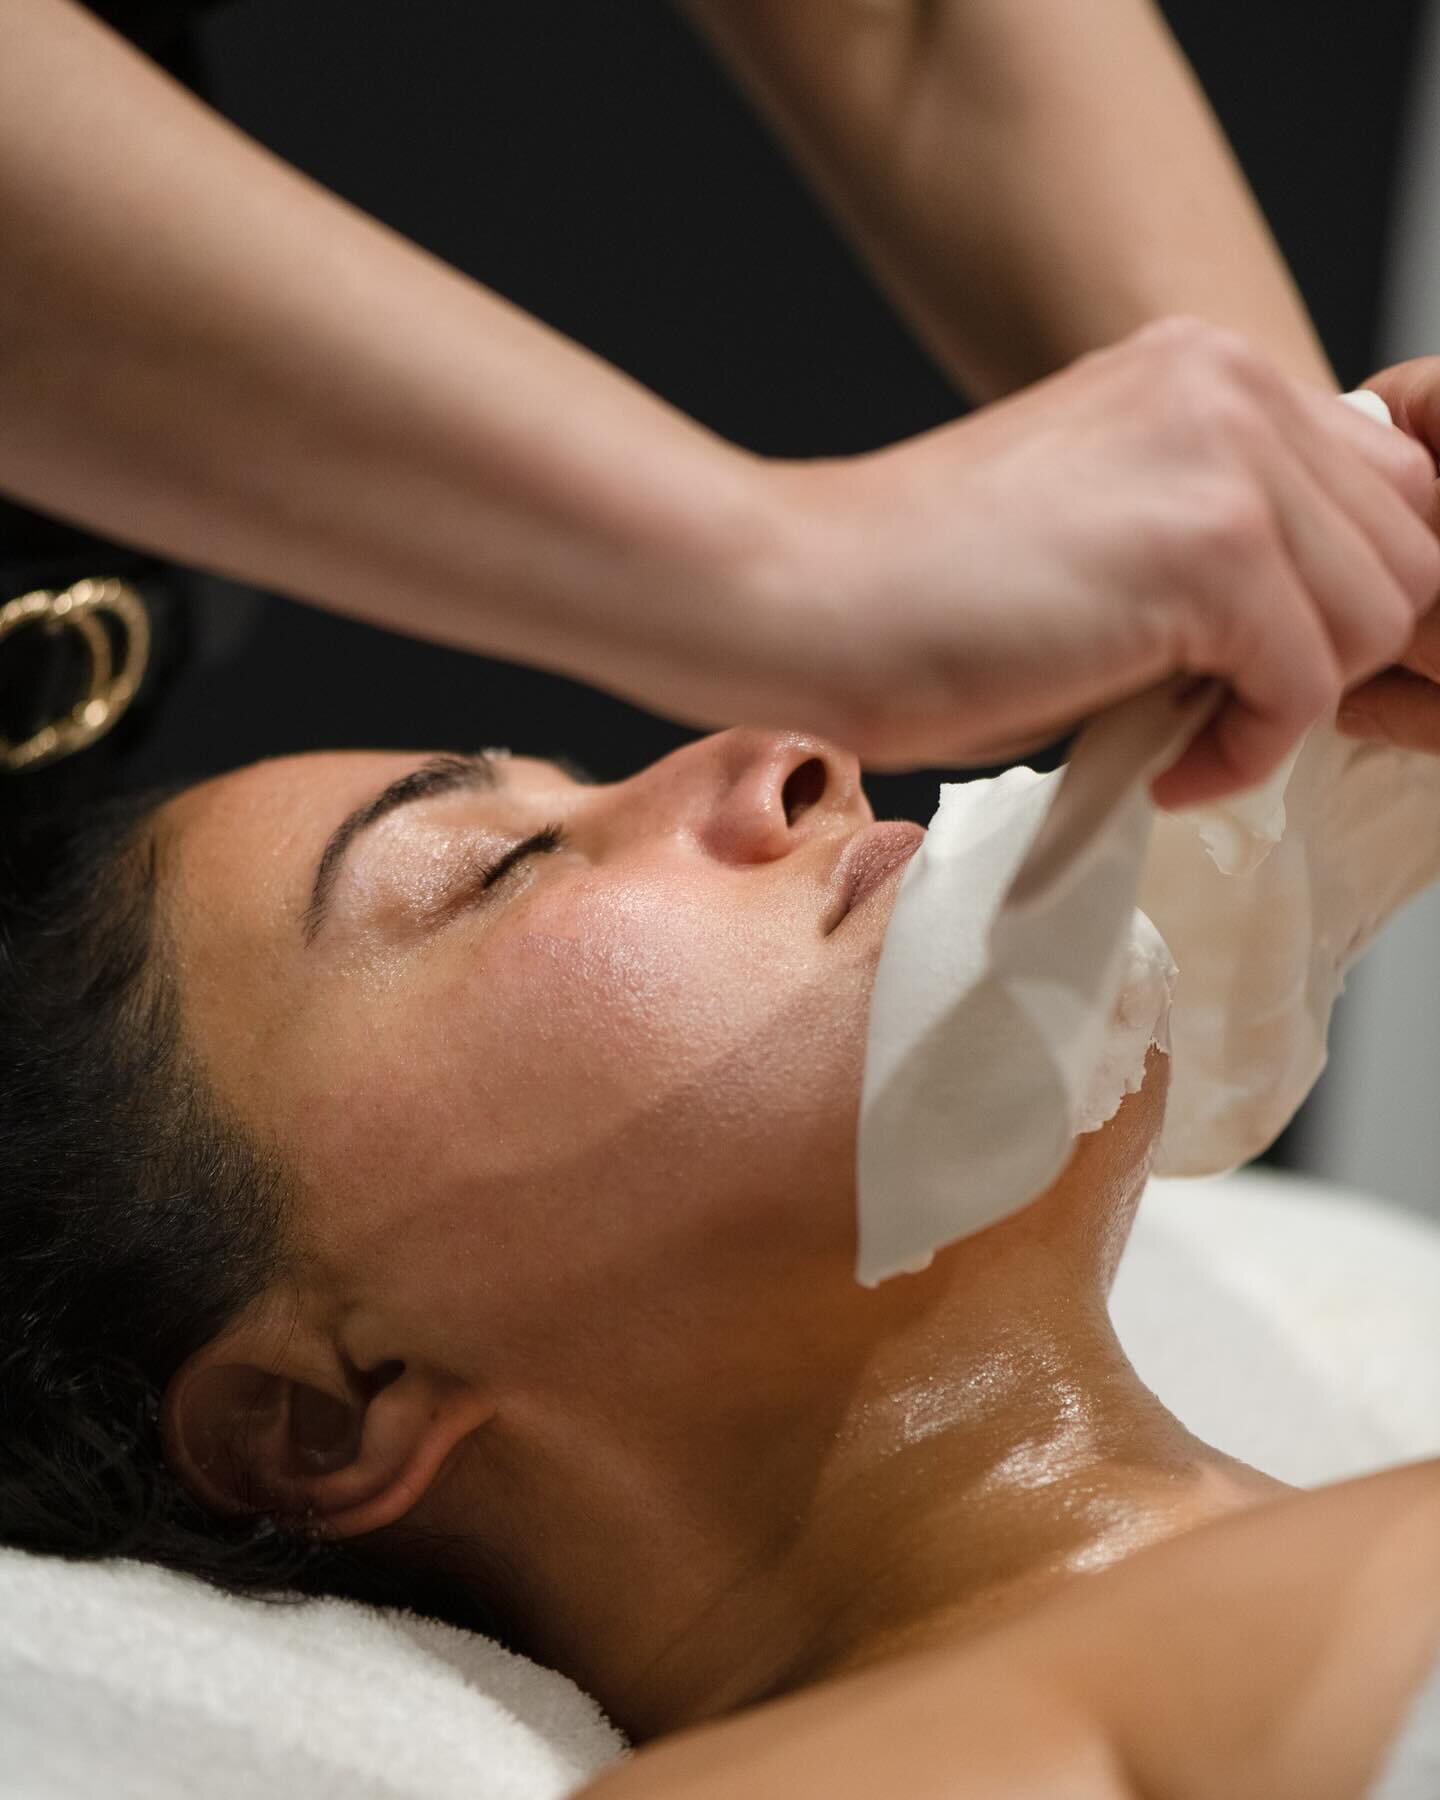 As the weather cools down nourish your skin and Indulge and be pampered with one of our signature facials. 

Included in this 70 minute treatment is an enzyme exfoliation and peel, face and decollatage massage, specialized mask to infuse all those ri